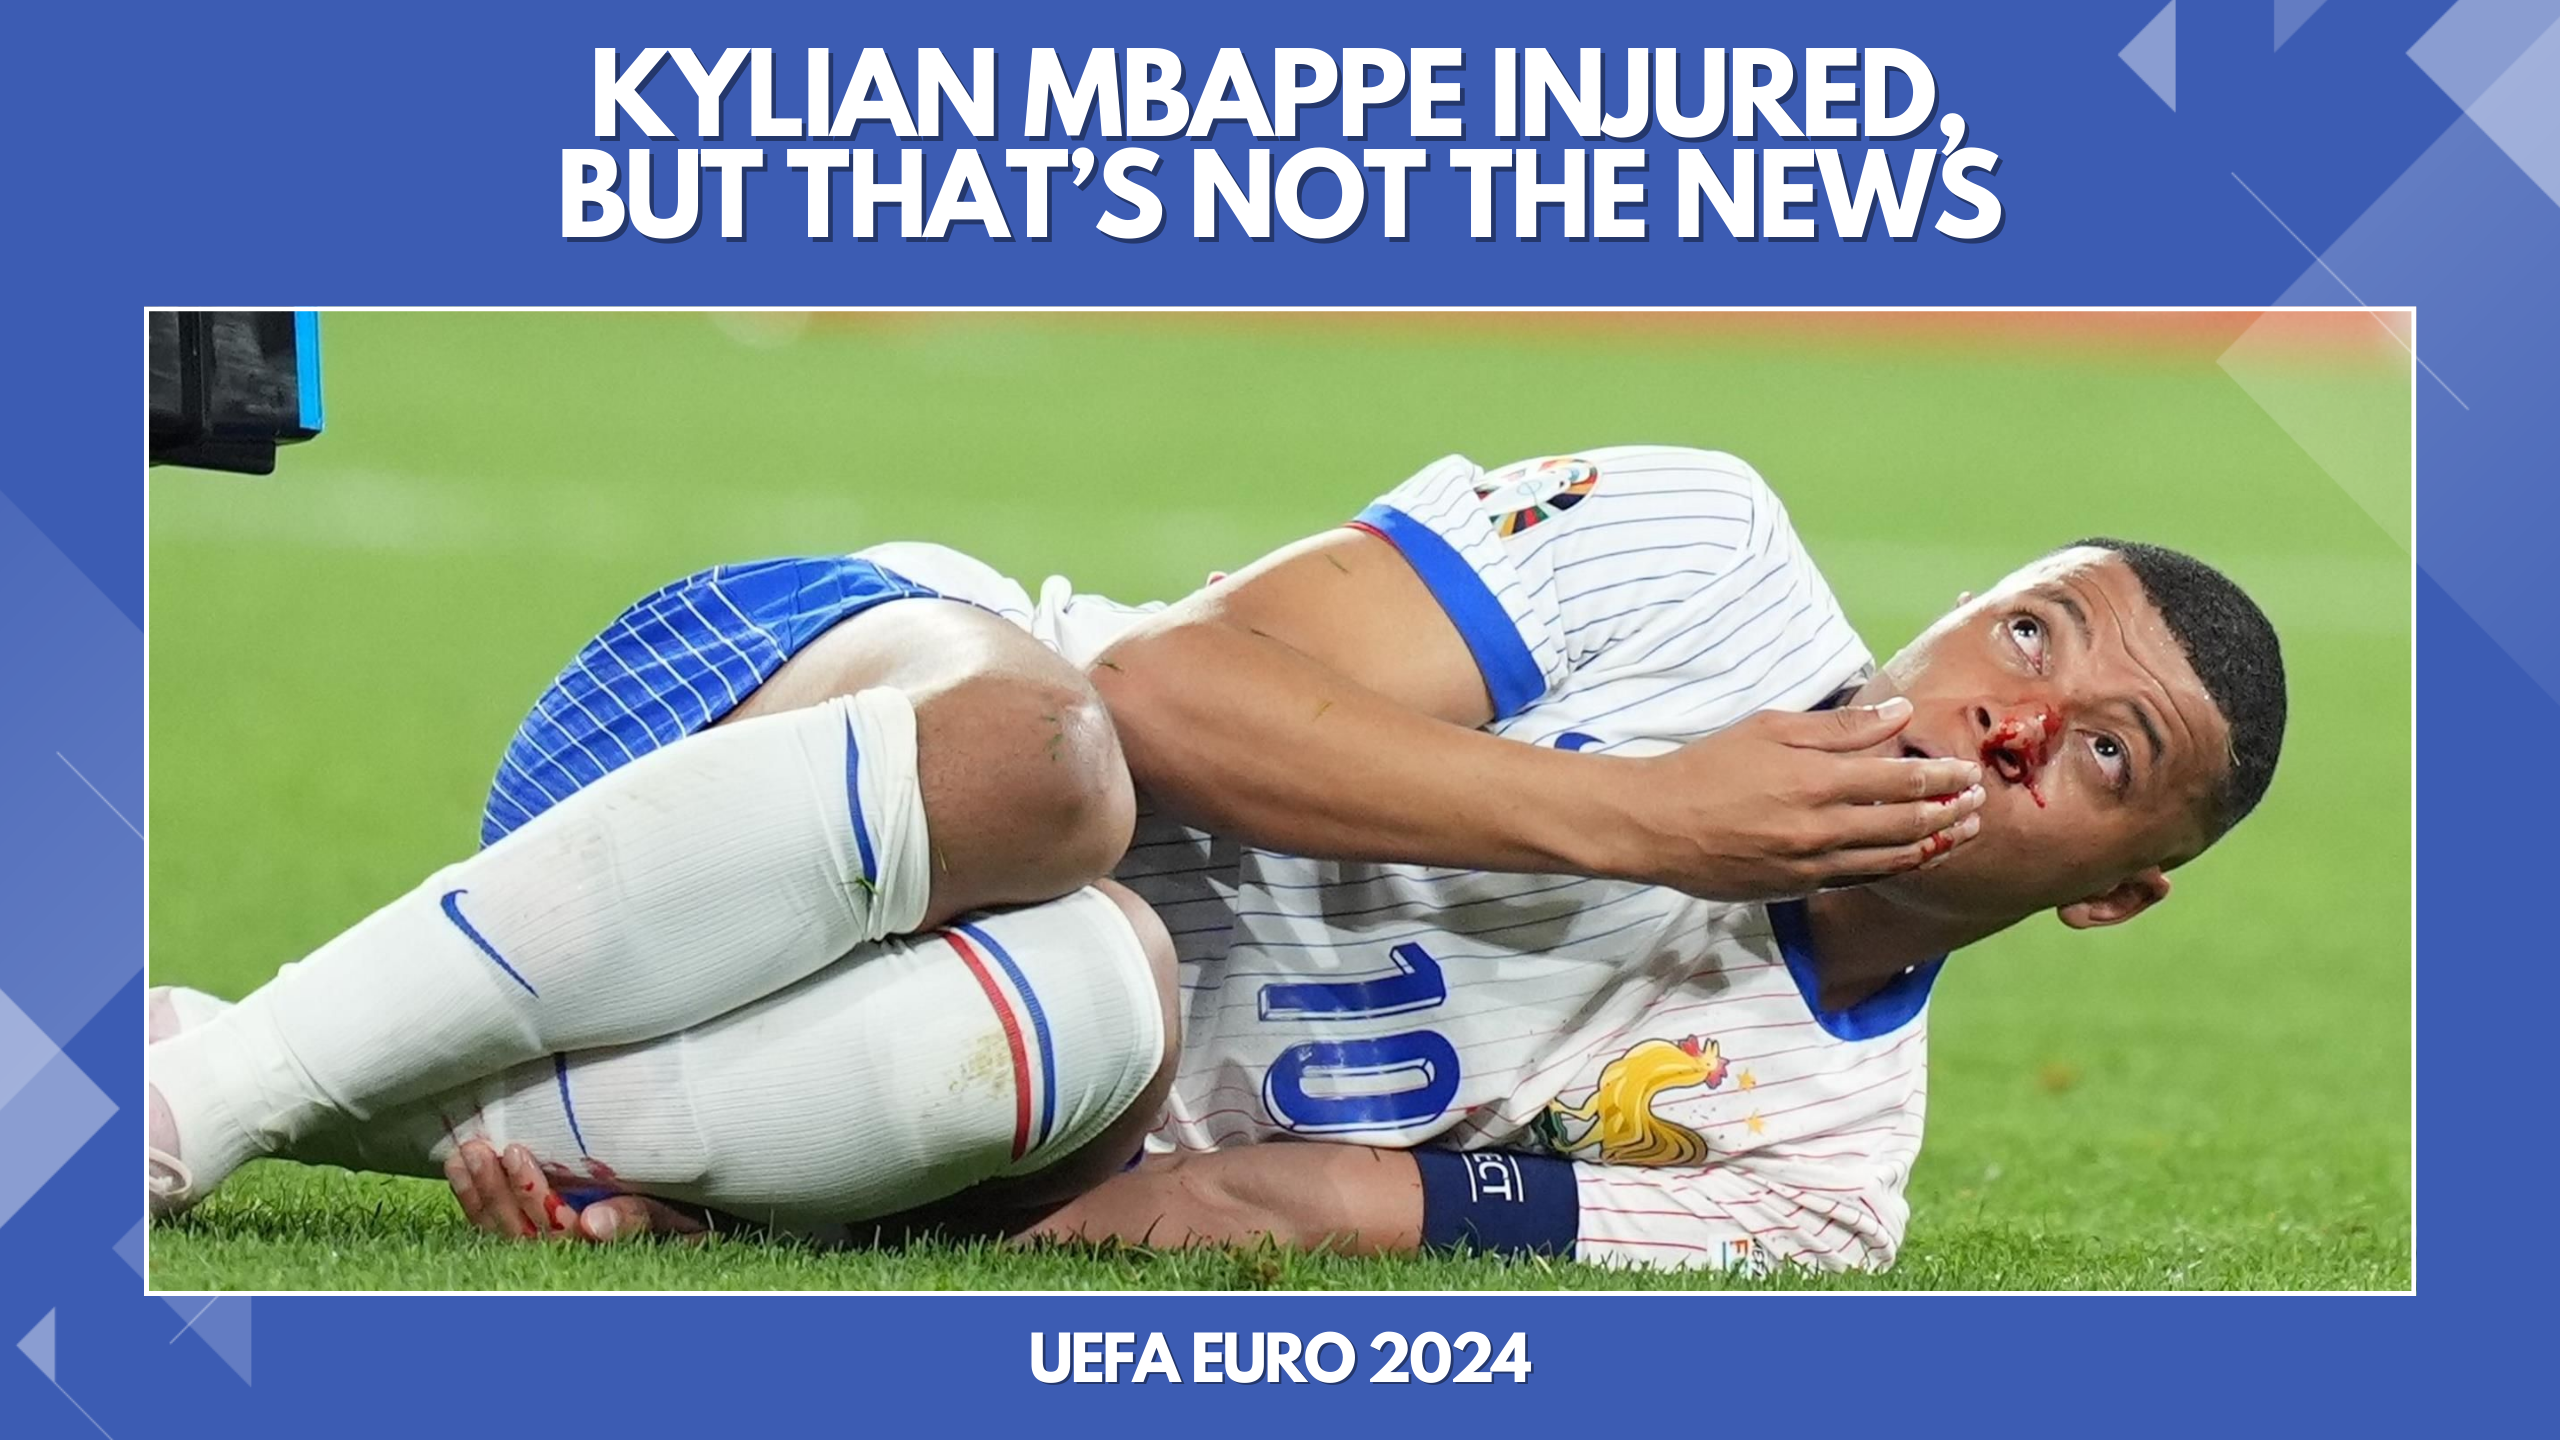 How is Kylian Mbappé coping with his injury after returning to play for France in Euro 2024?